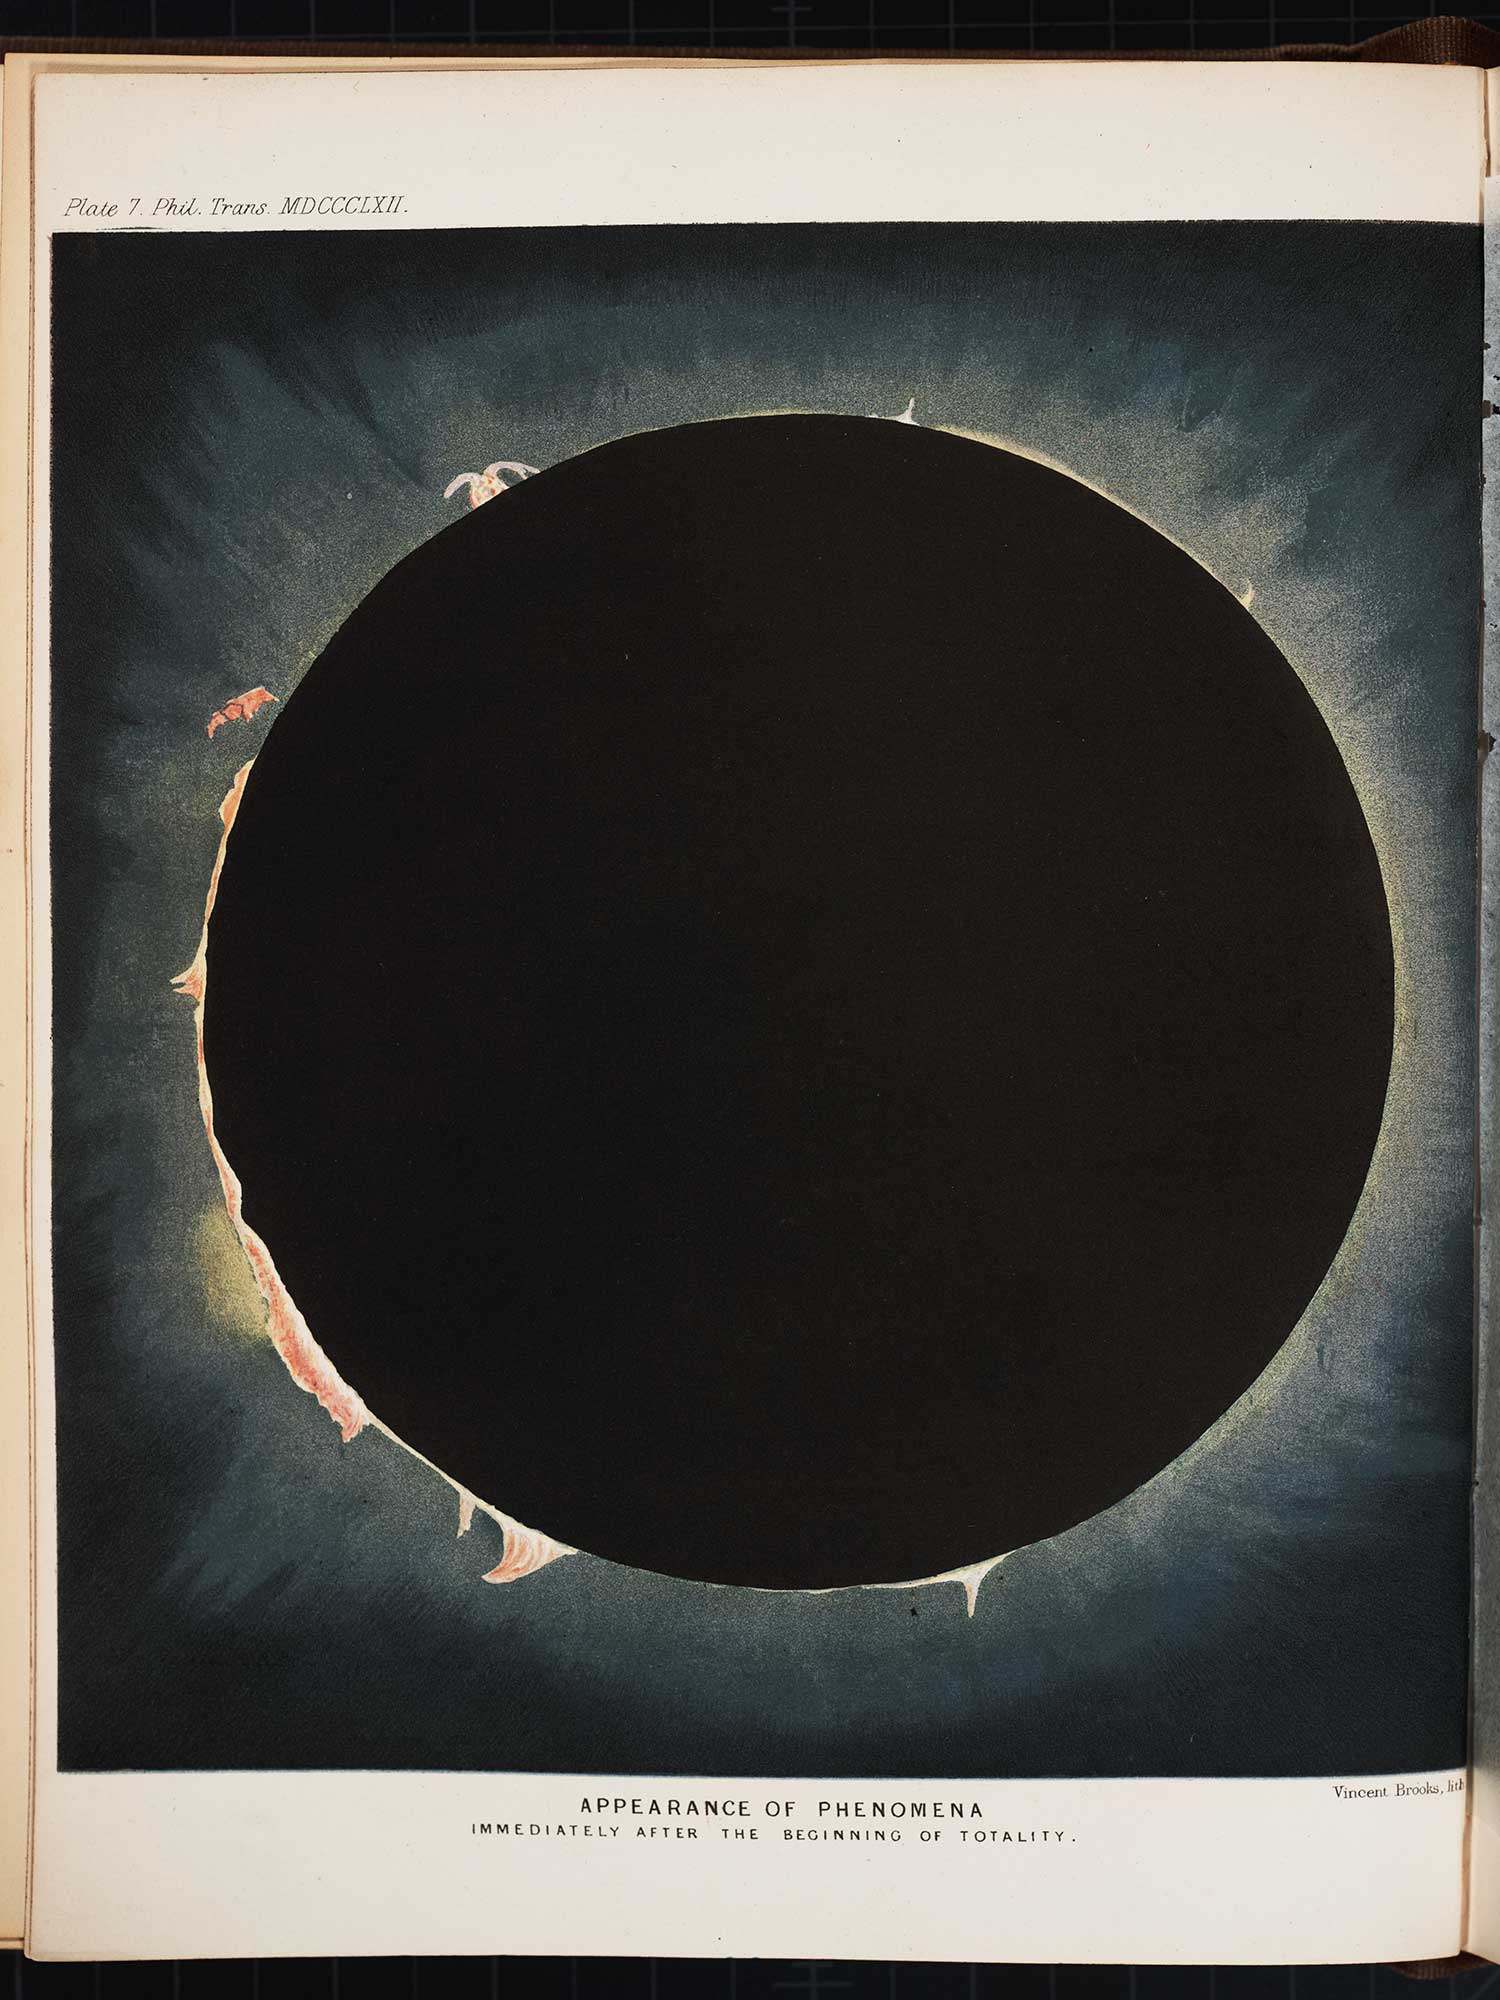 De la Rue, Warren, “The Bakerian Lecture: On the Total Solar Eclipse of July 18th, 1860, Observed at Rivabellosa, Near Miranda de Ebro, in Spain,” in Philosophical Transactions of the Royal Society of London, vol. 152 (1862).